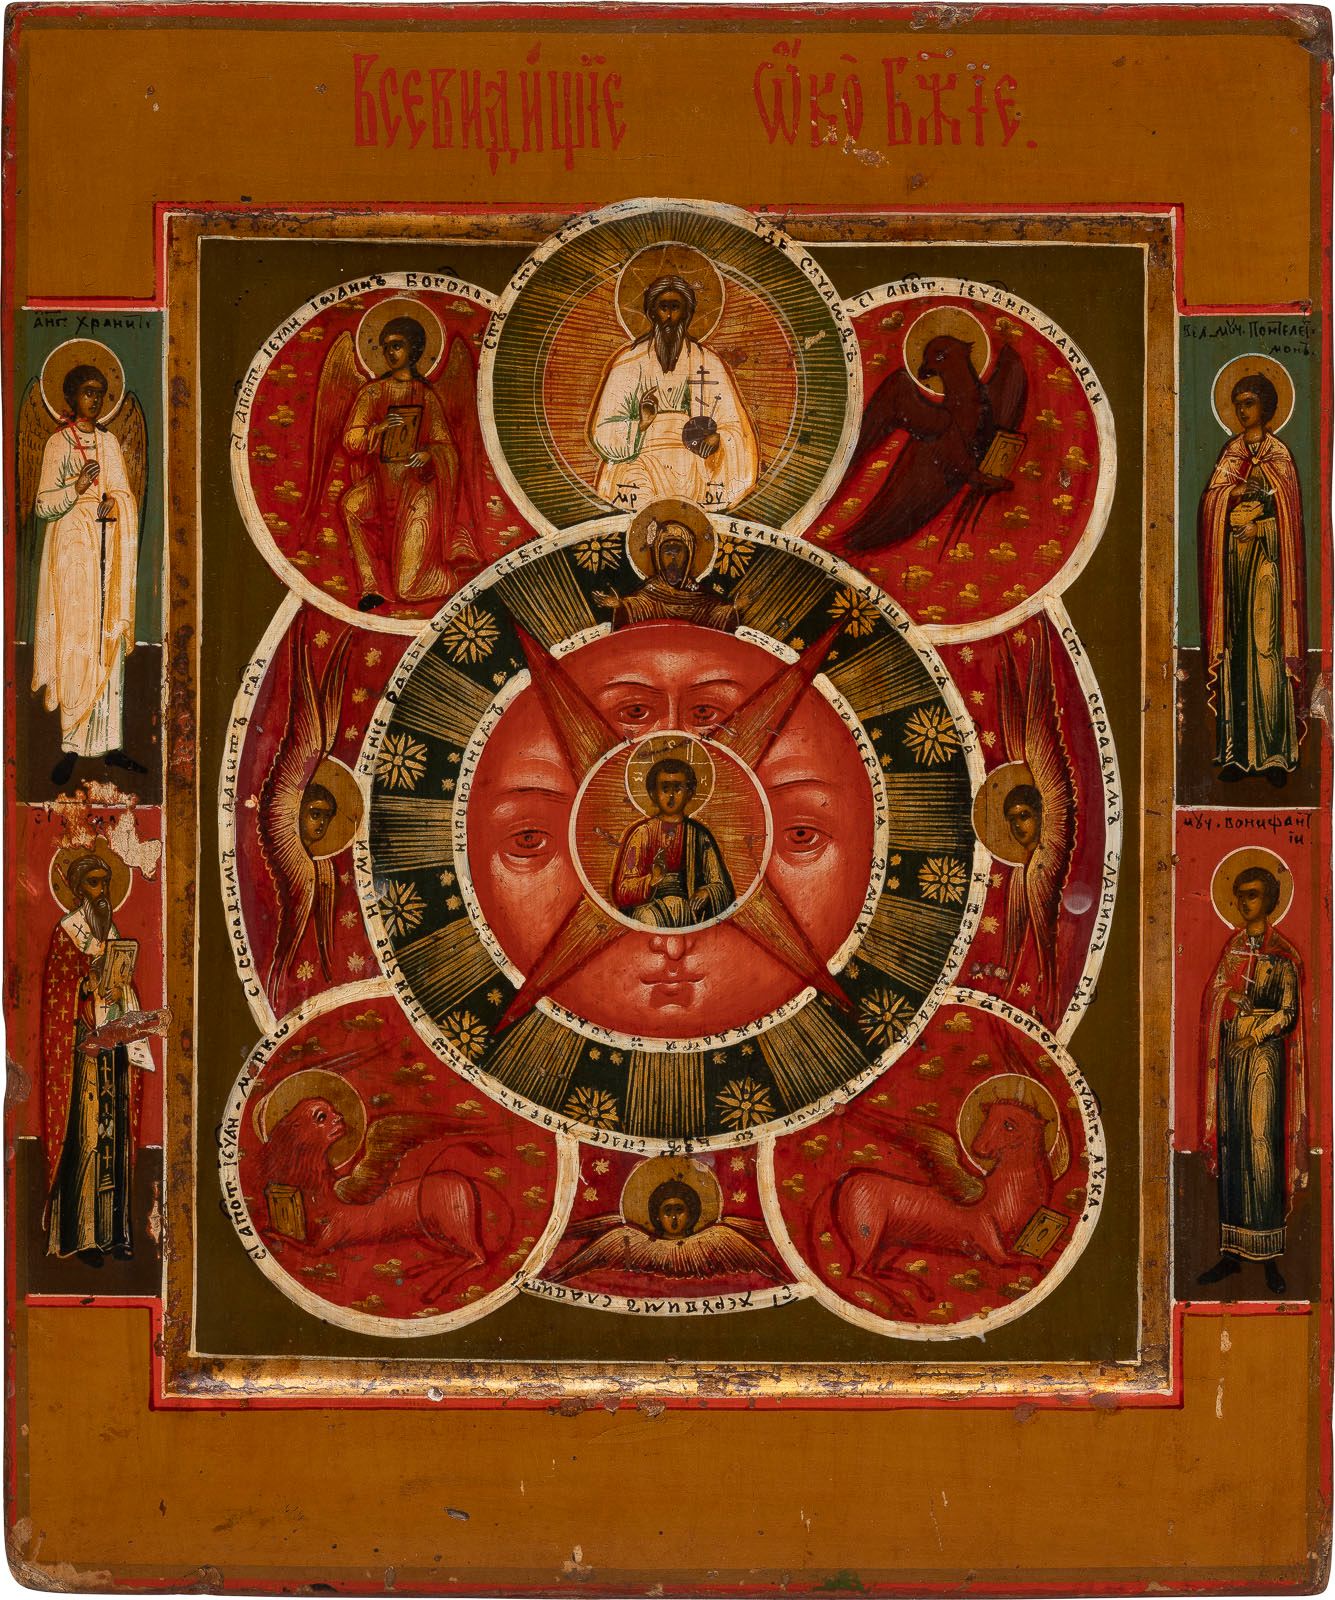 AN ICON SHOWING THE 'ALL-SEEING EYE OF GOD' ICONA CHE MOSTRA L'OCCHIO DI DIO CHE&hellip;